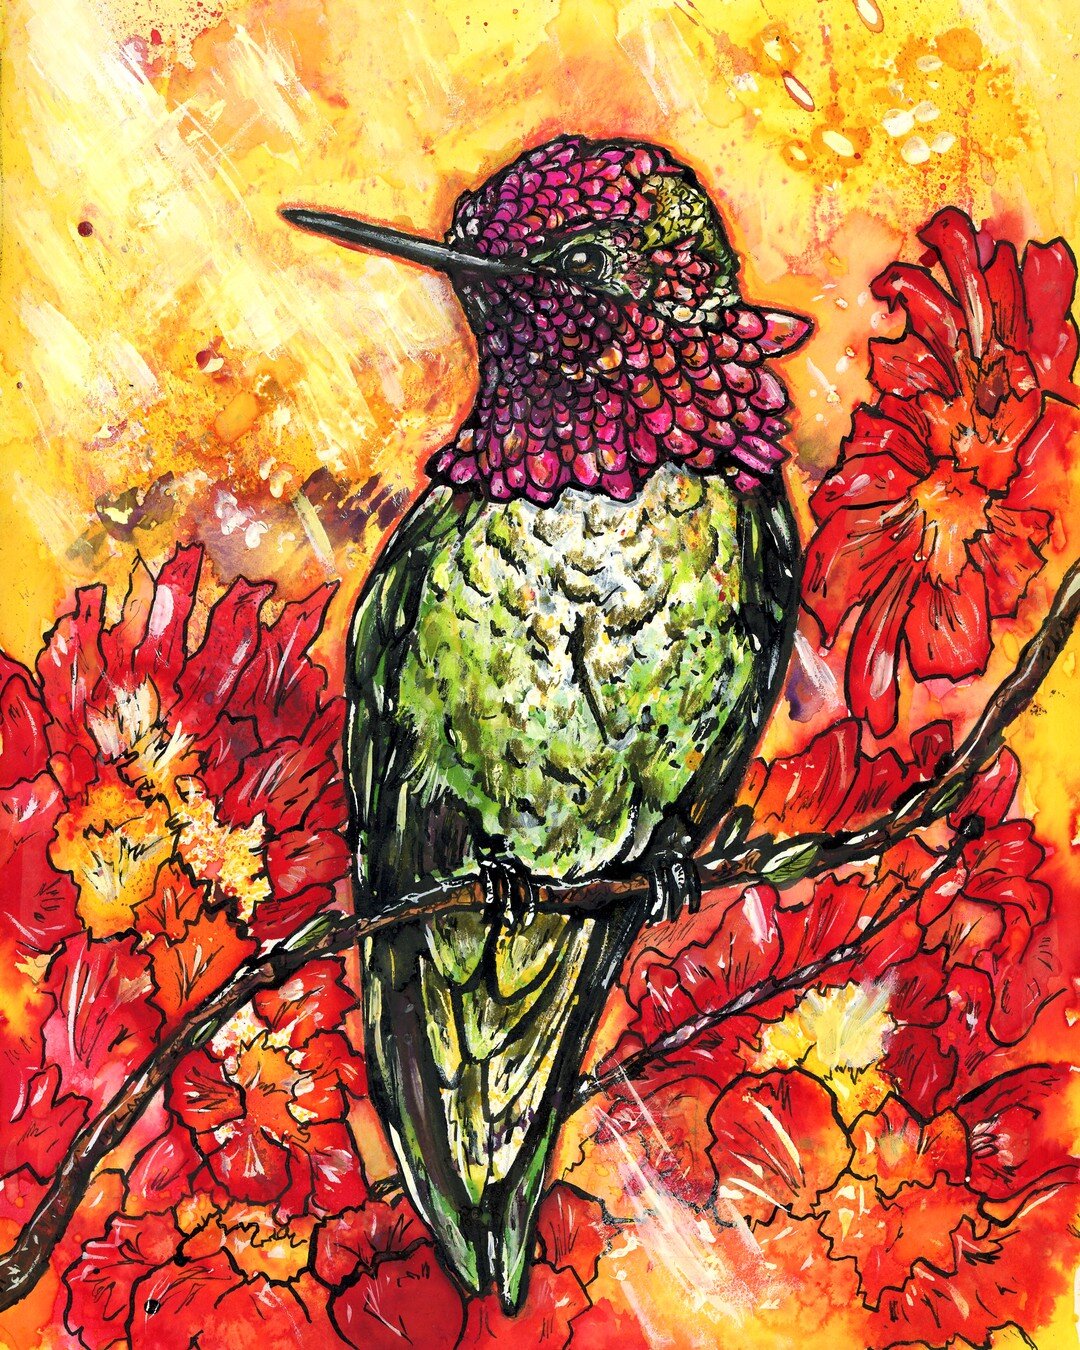 September 8, 2022: Anna's Hummingbird

One thing that California definitely has over the east coast is hummingbird variety (though I guess that really isn't hard when the status quo is one species!) I sure do miss my Ruby-throats, but I do love the g